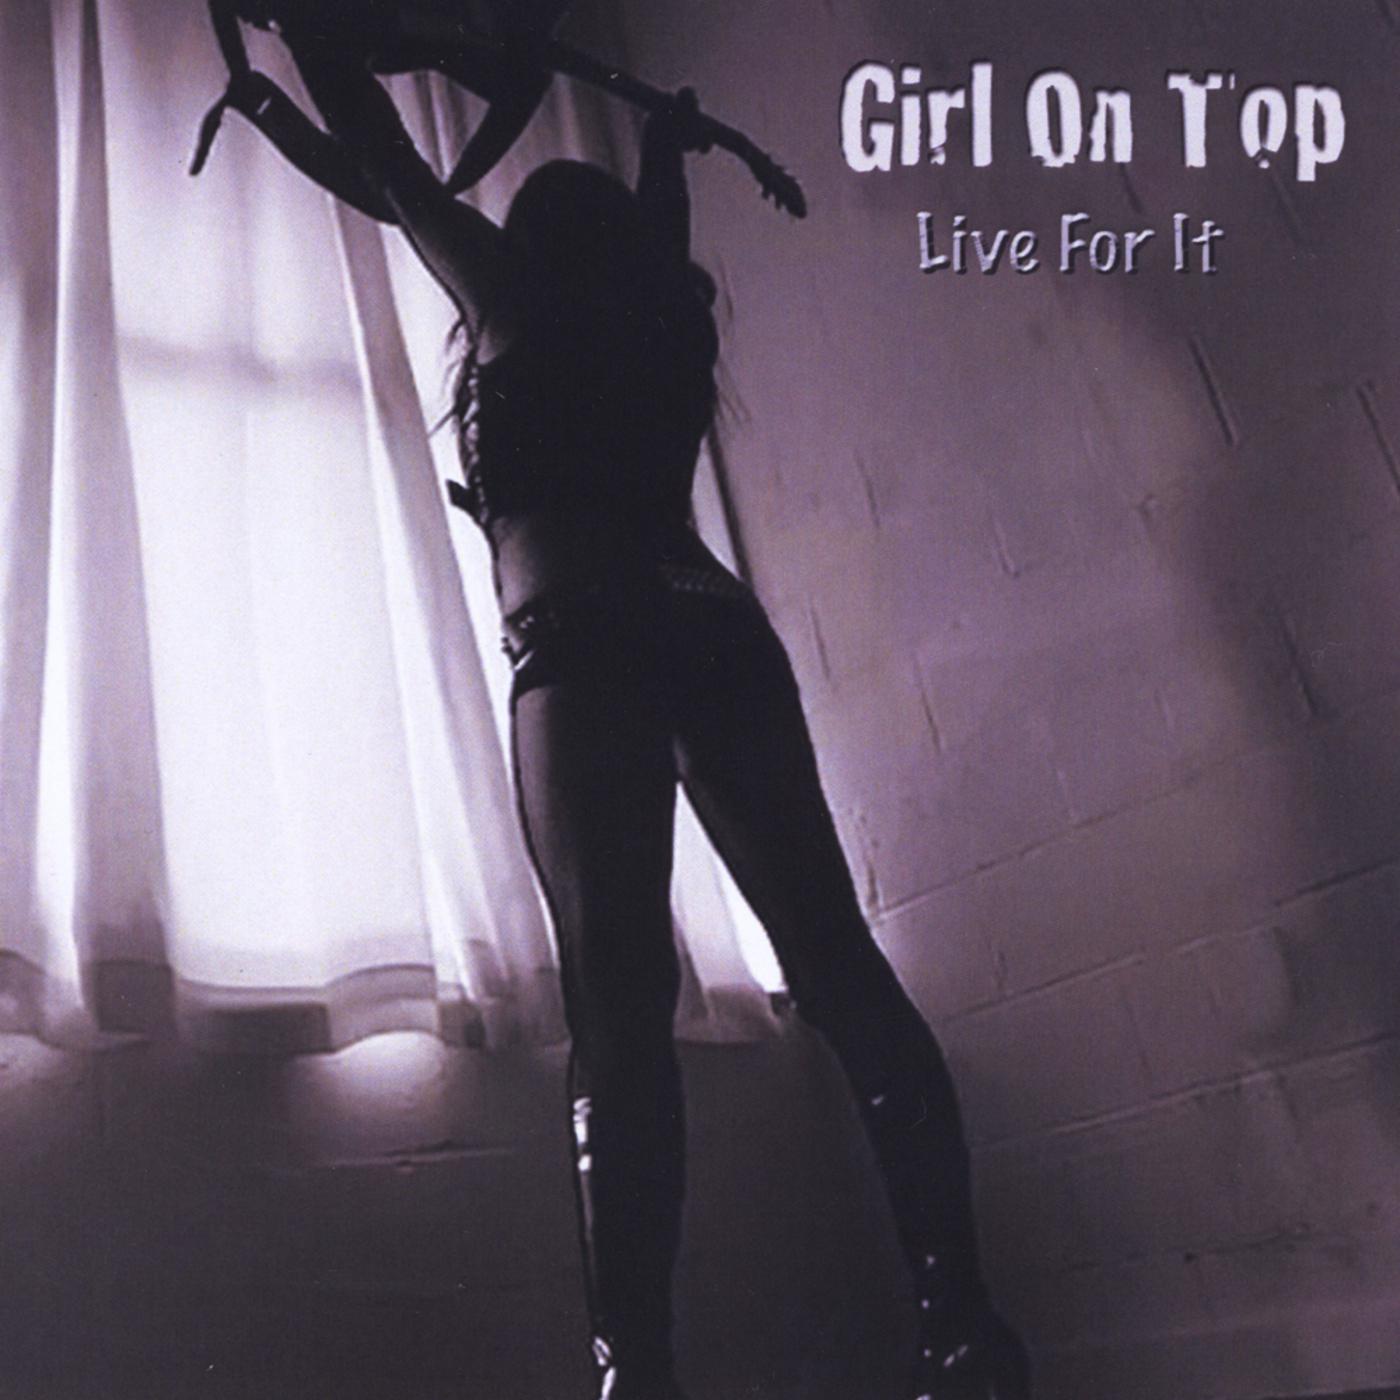 GIRLS ON TOP - I Don't Want to Stop